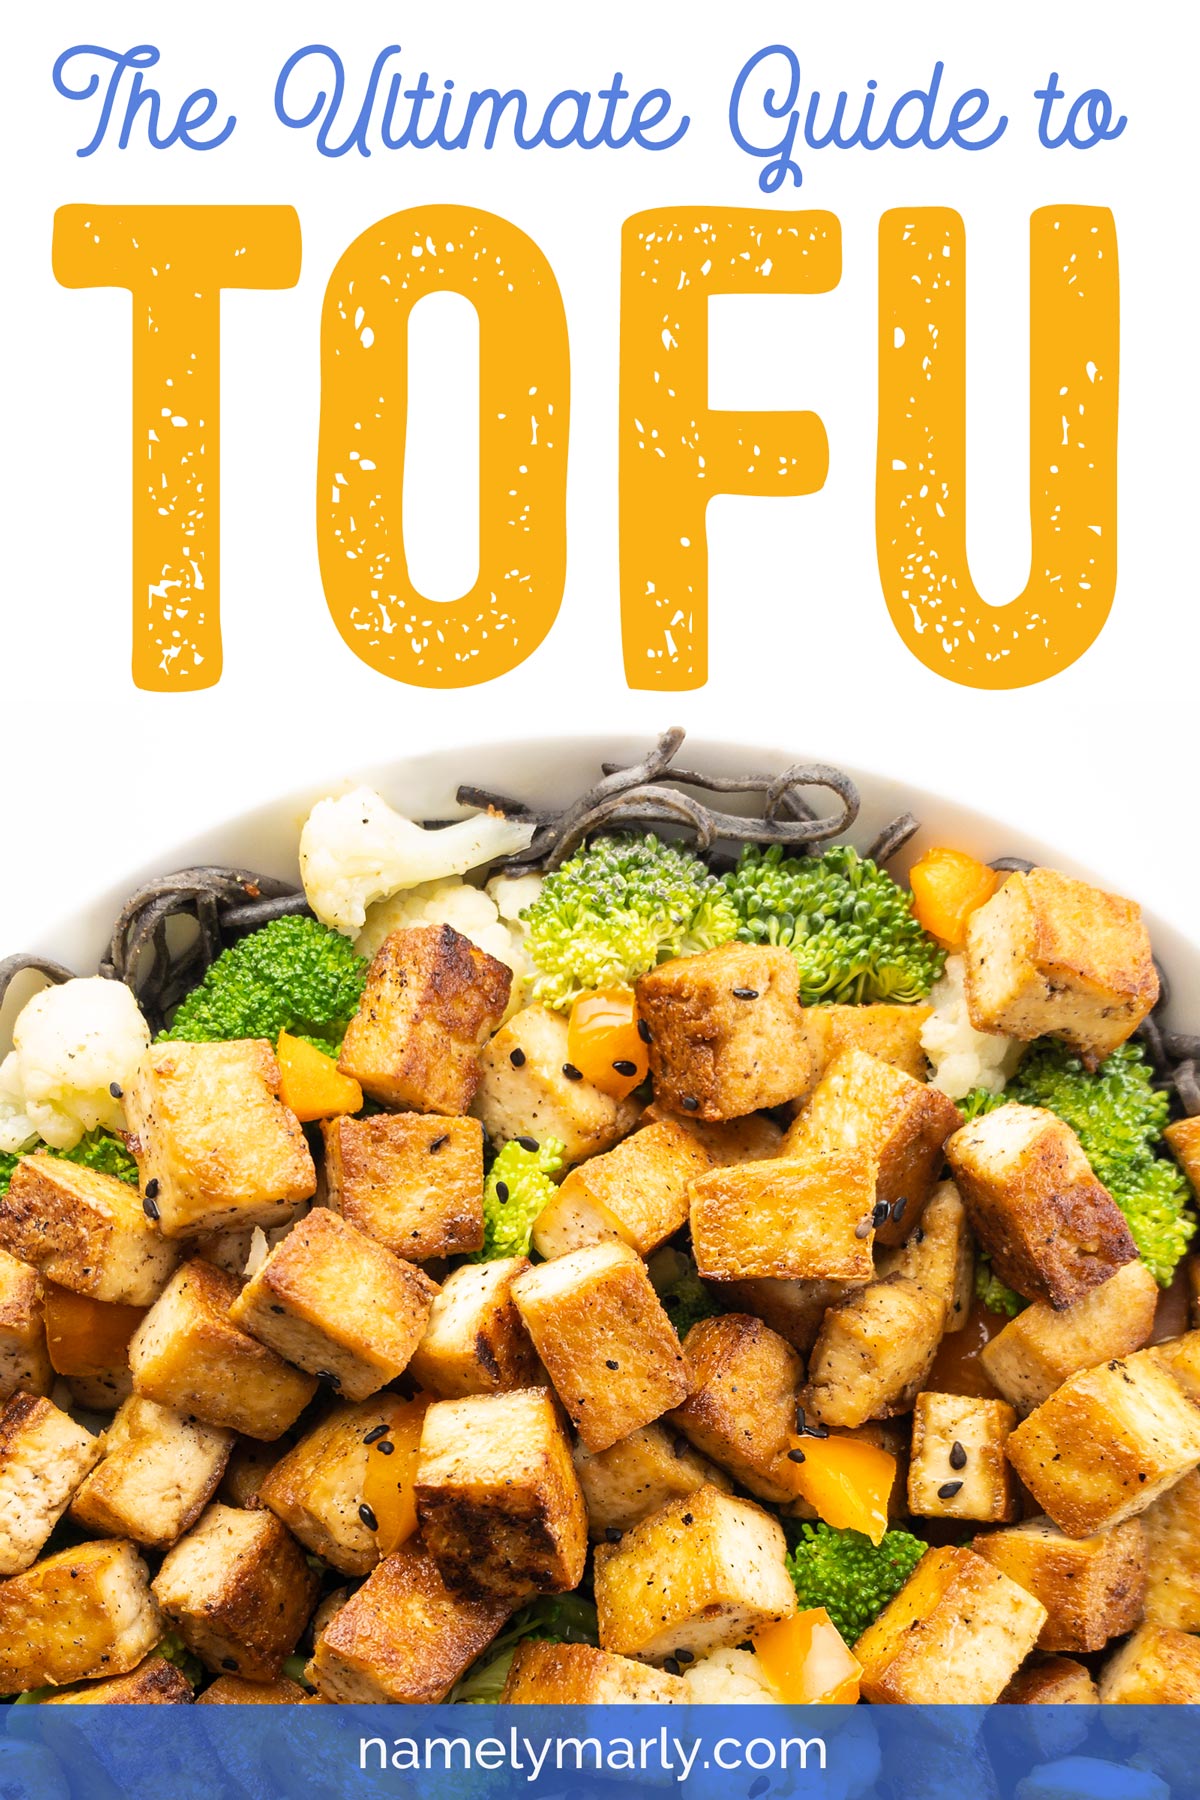 An image of roasted tofu in a bowl with the text "The ultimate guide to tofu"